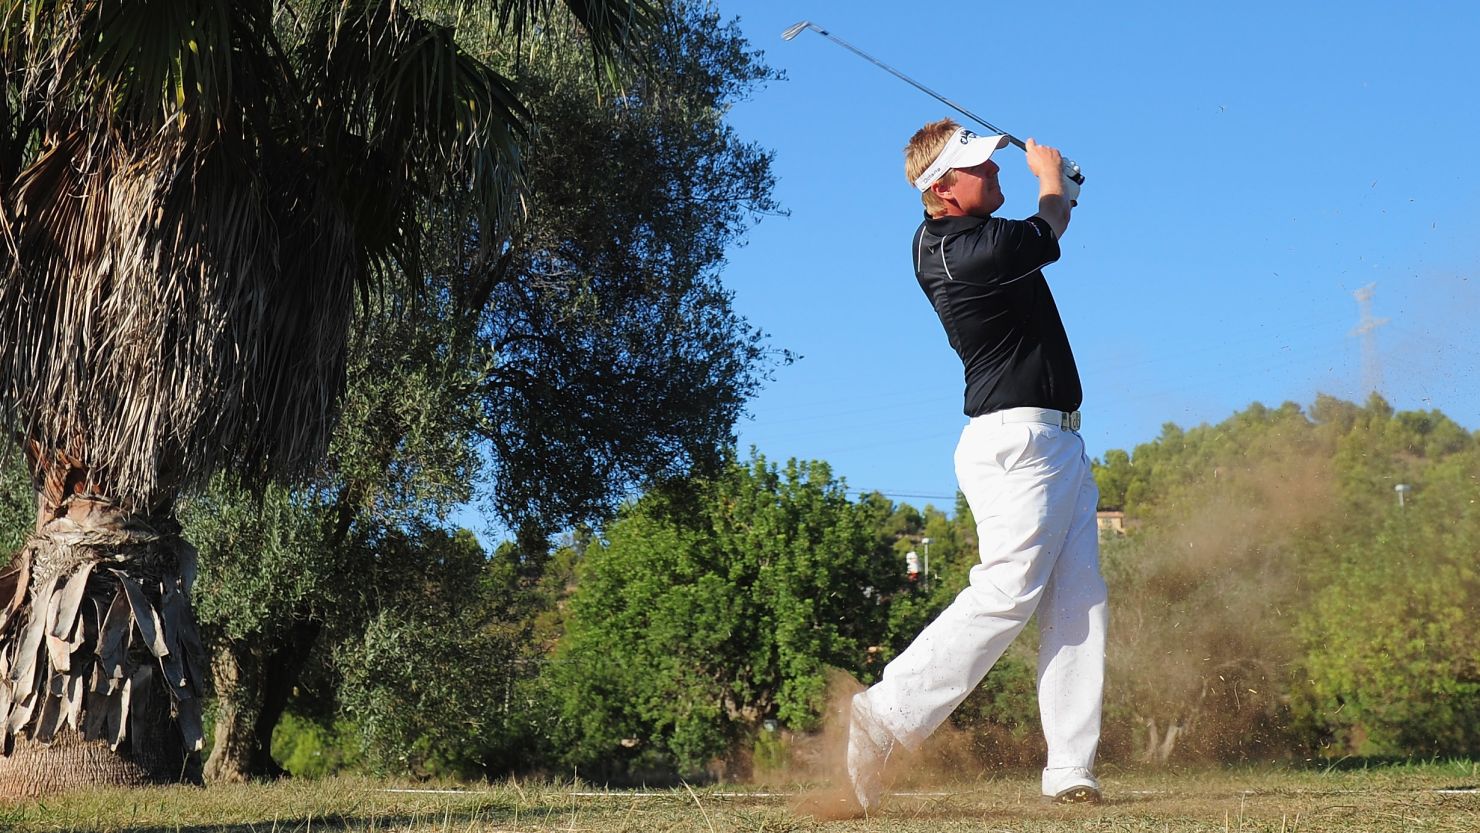 Ross McGowan plays a shot during the first round at the Club de Campo del Mediterraneo.